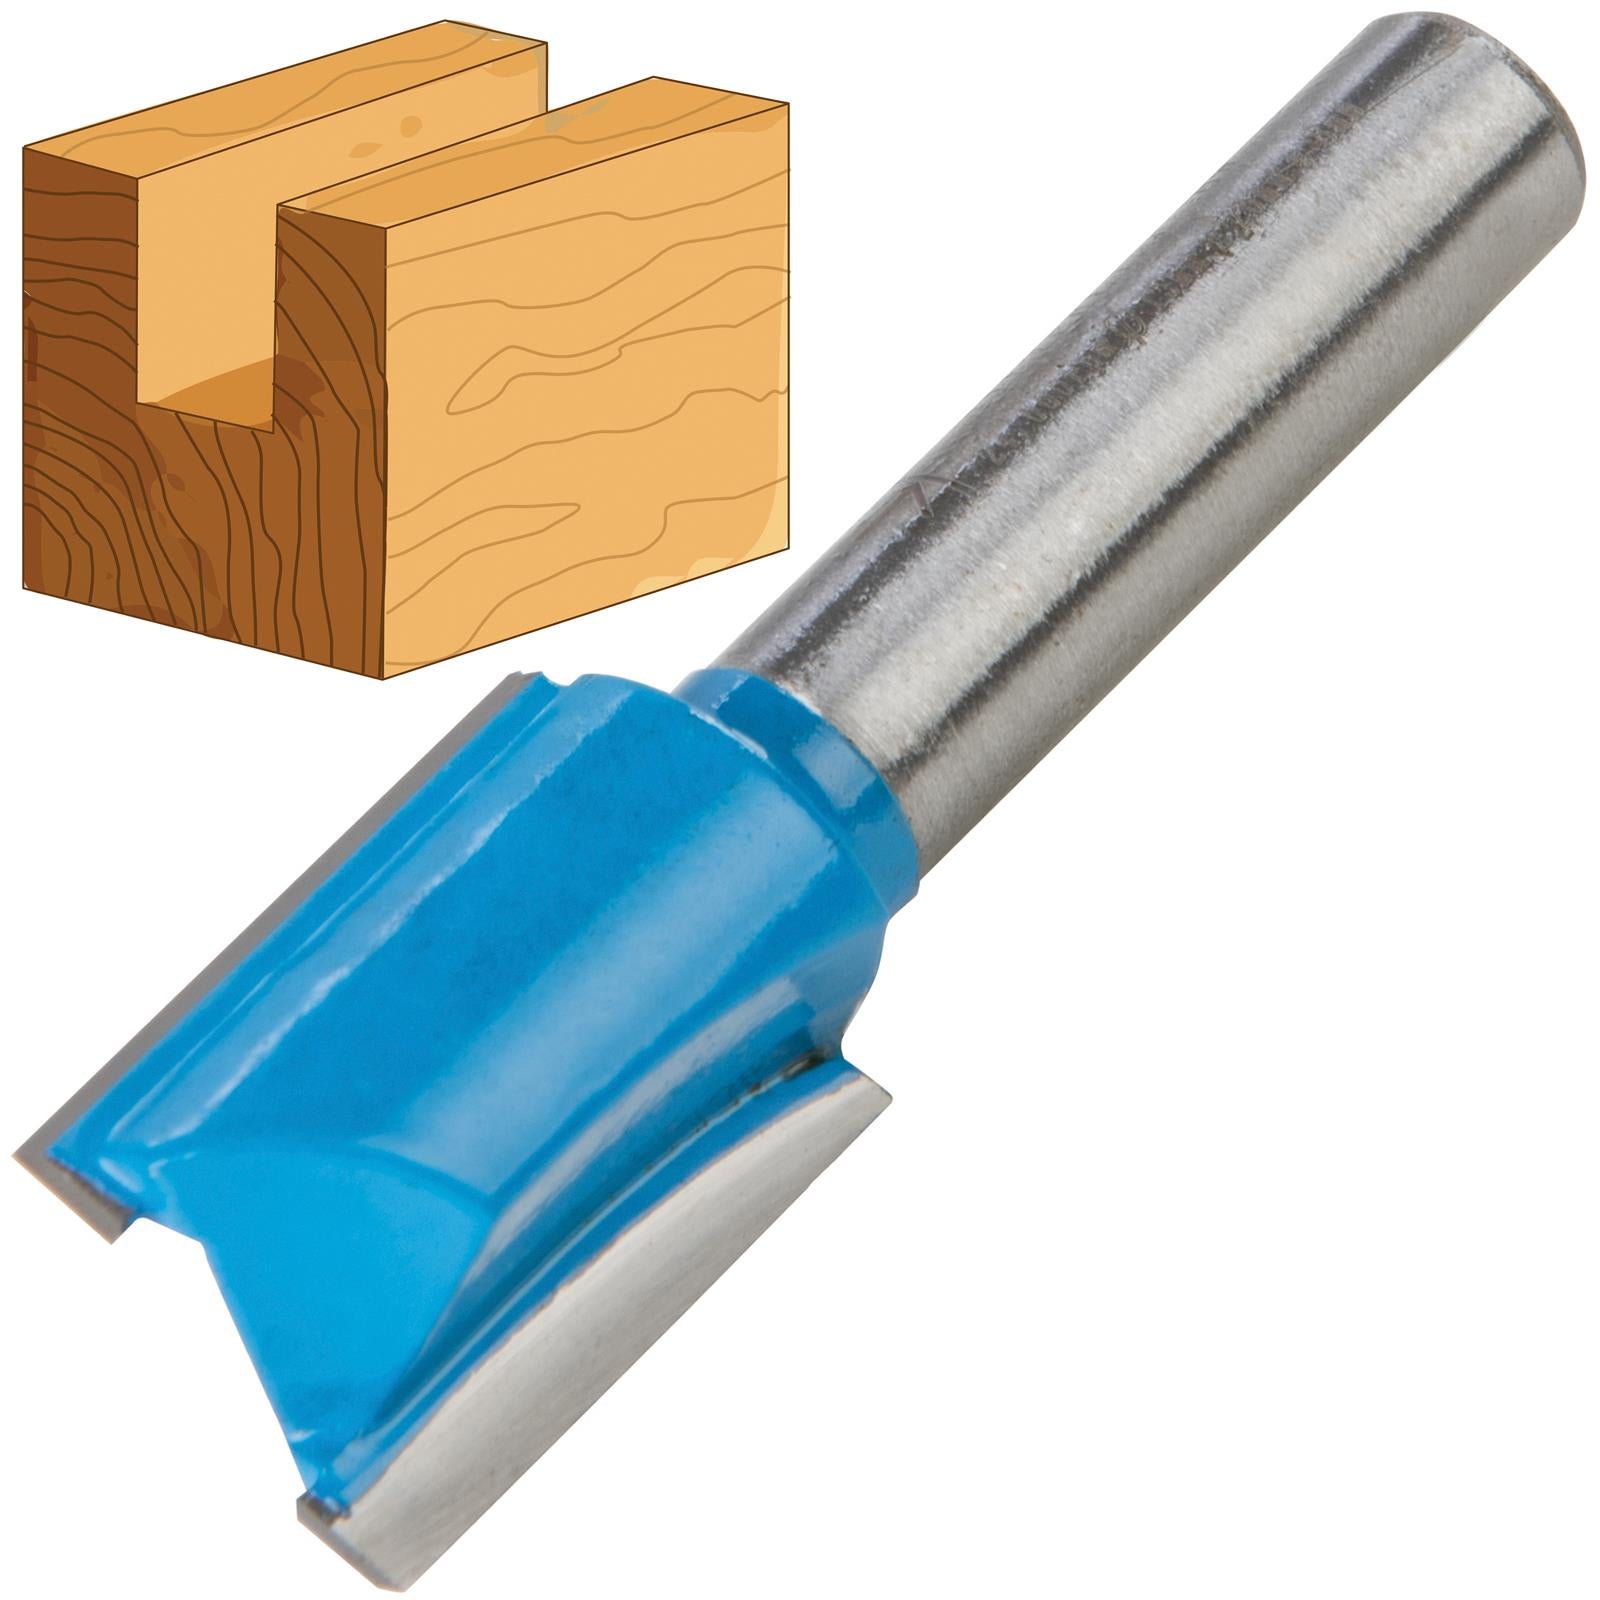 Silverline 8mm Shank Straight Metric Router Bits Cutters